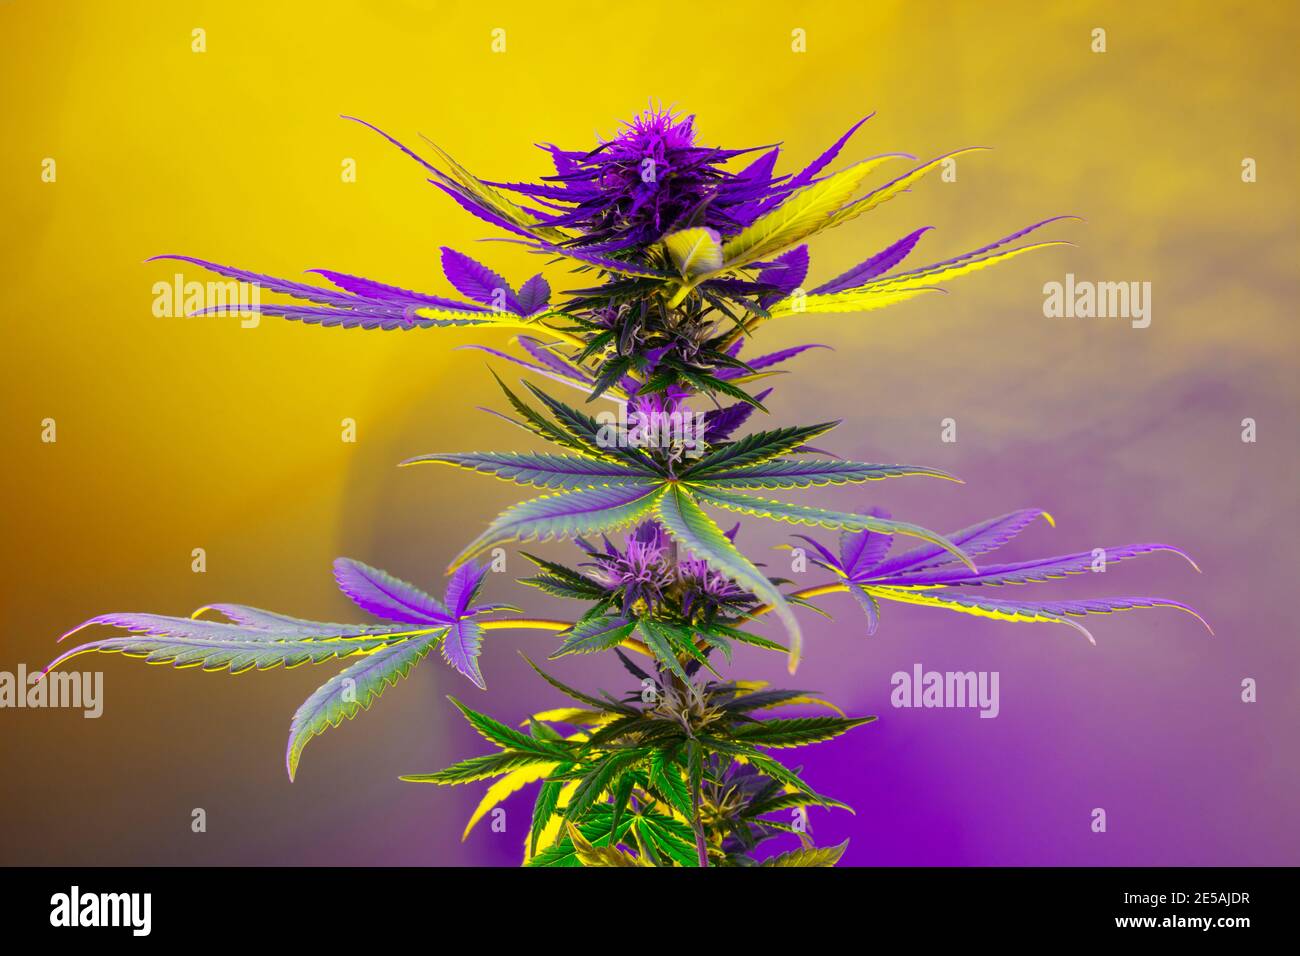 colorful weed plant